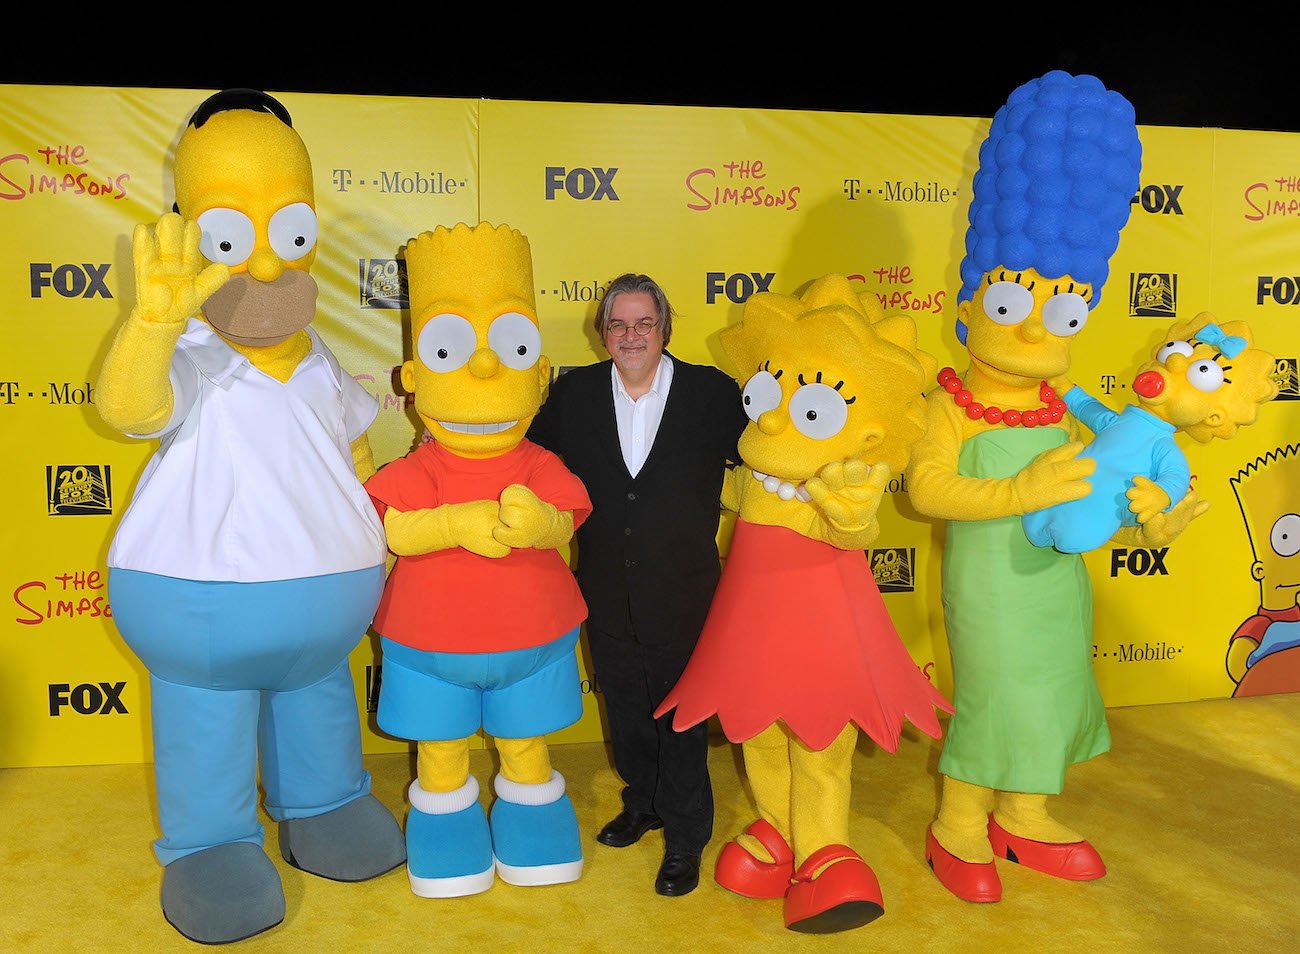 Matt Groening posing with characters of The Simpsons